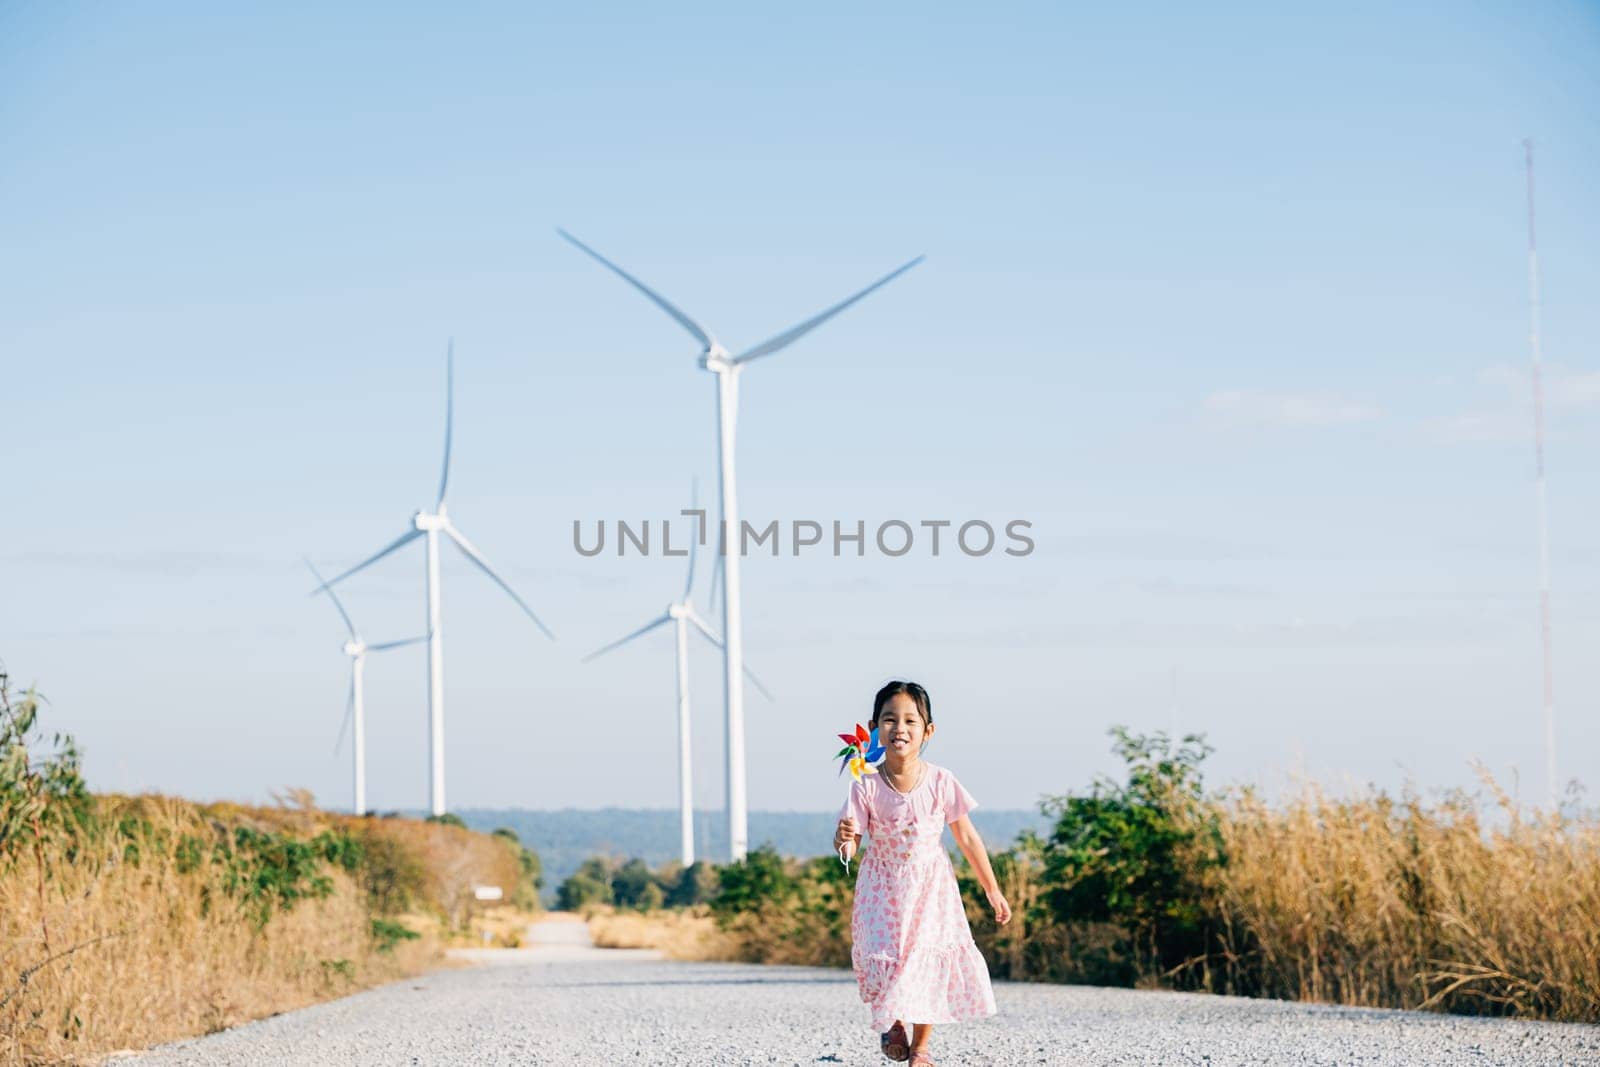 Little girl's playful learning near windmills holding pinwheels with joy. Embracing wind energy education in a cheerful clean electricity generating wind turbine landscape.